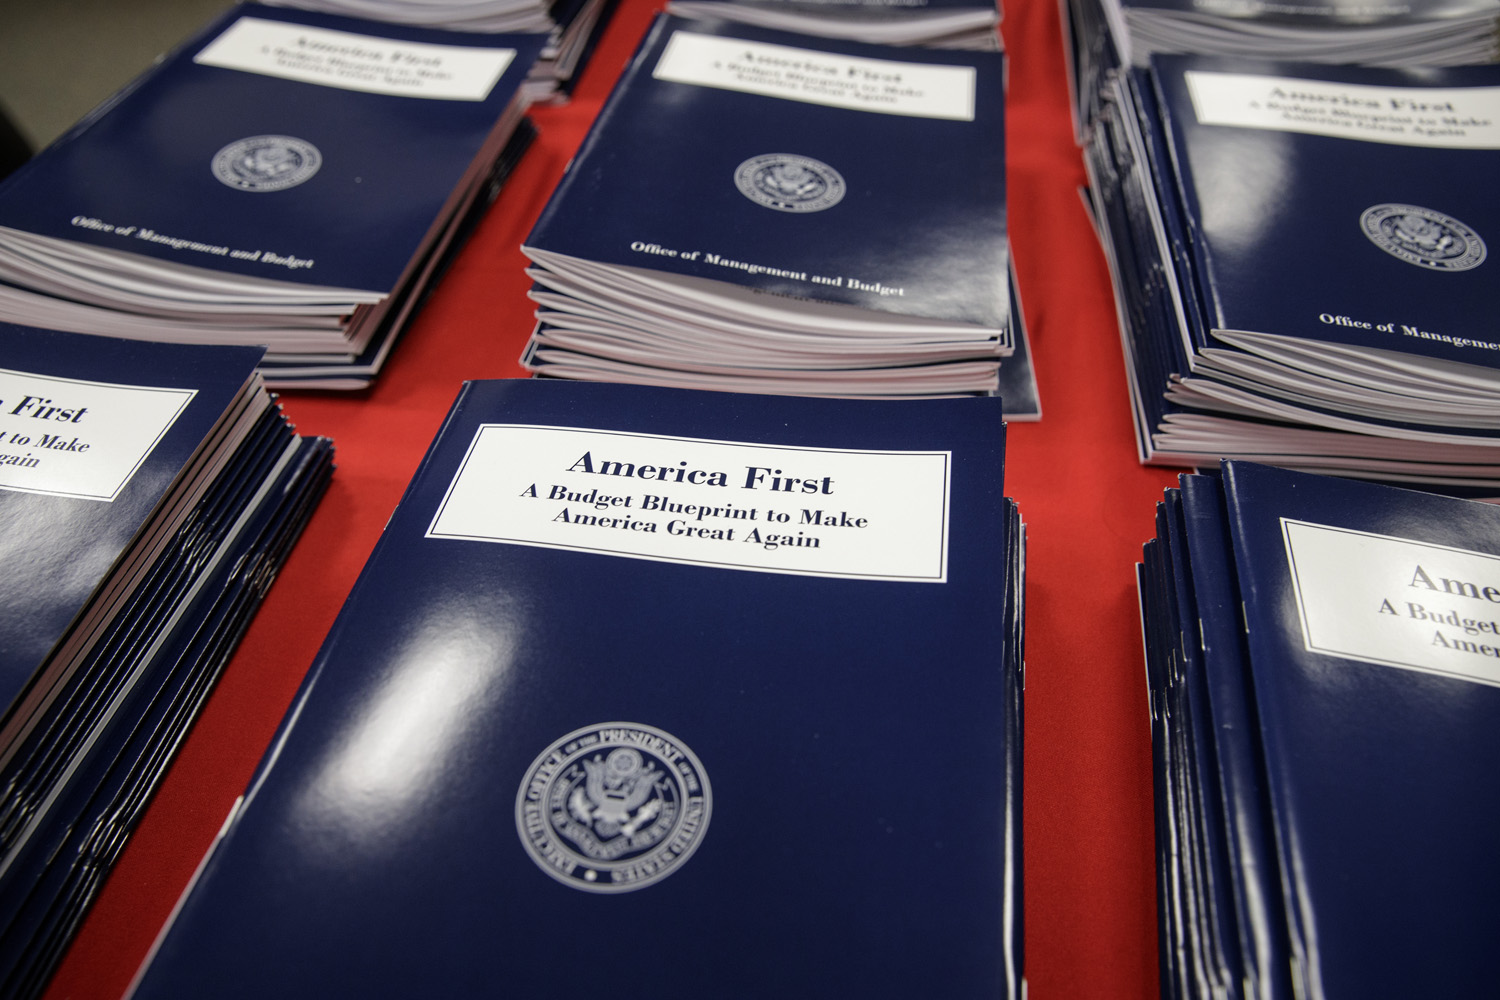 Copies of President Donald Trump's first budget are displayed at the Government Printing Office in Washington. (J. Scott Applewhite/AP)